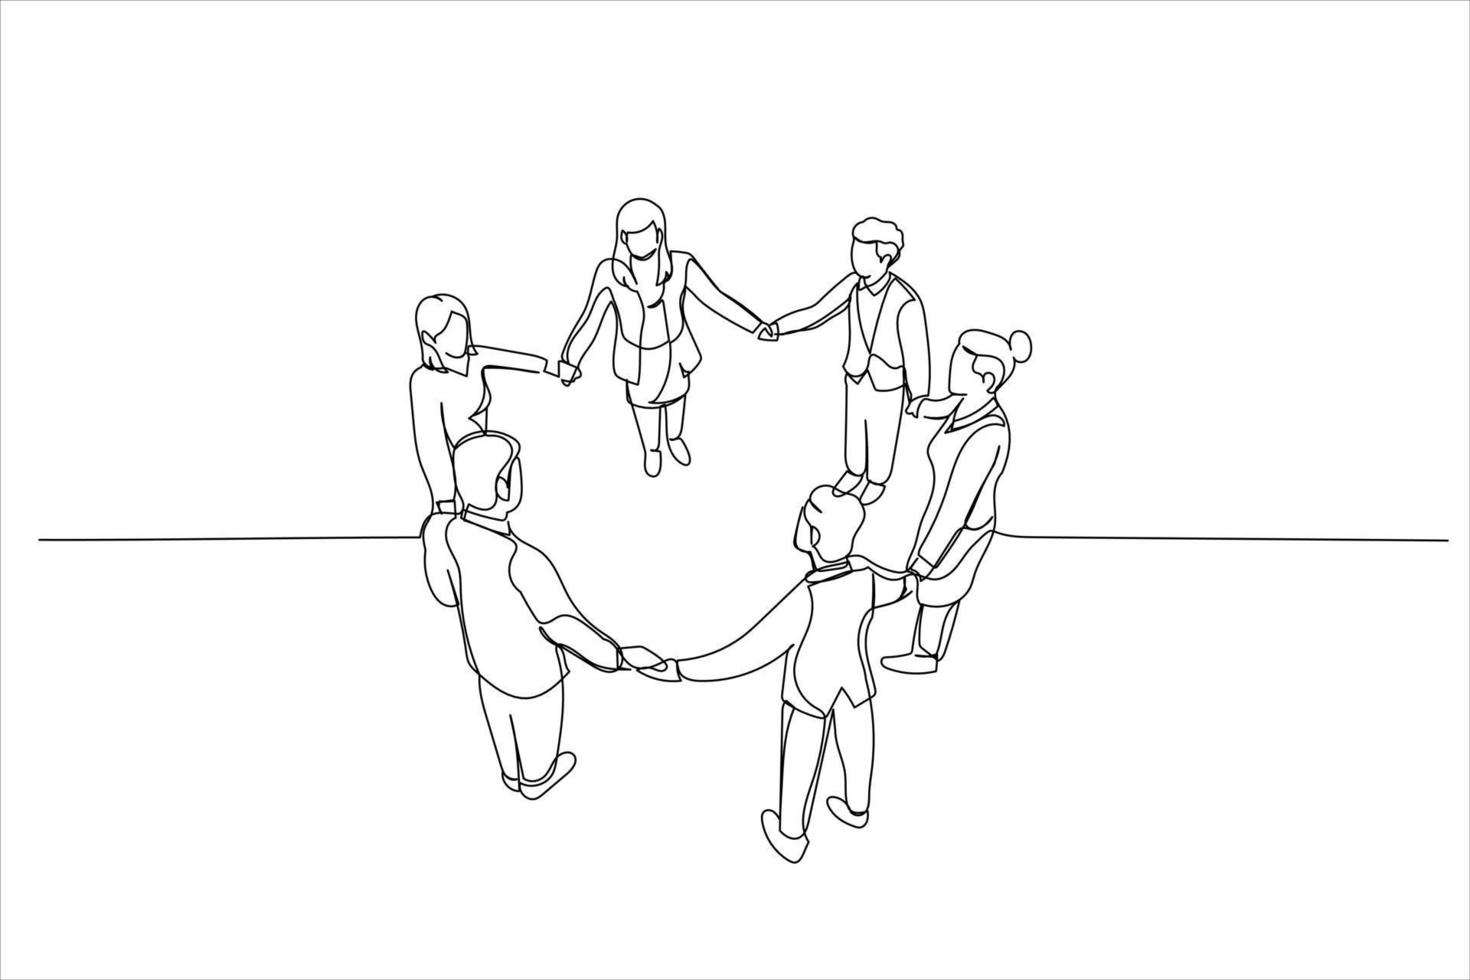 Drawing of business team are holding hands forming circle. Single continuous line art vector